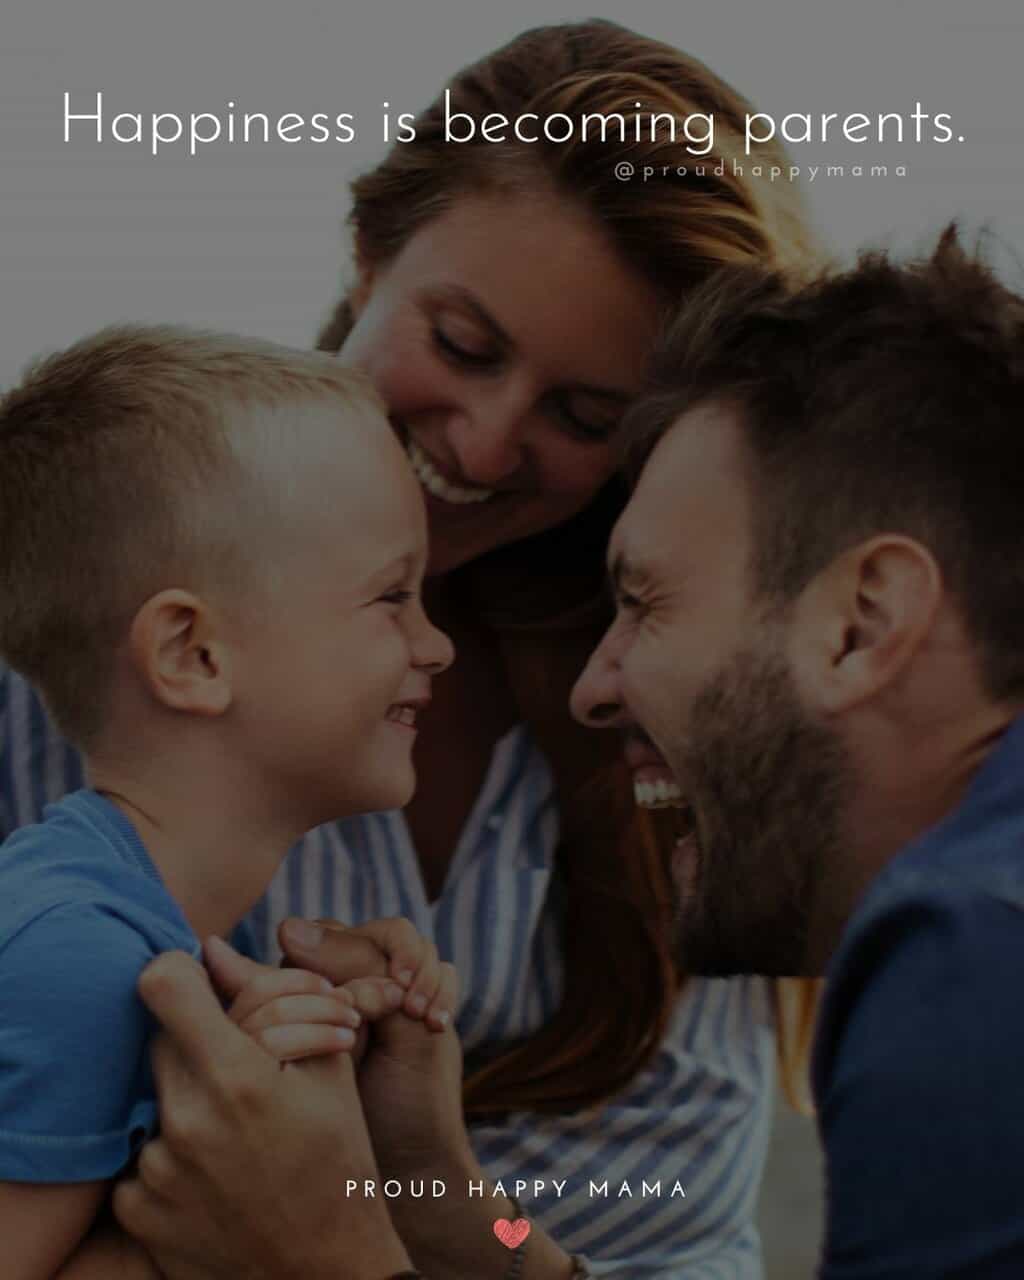 Mother and father laughing with young son in blue shirt with becoming parents quote text overlay. ‘Happiness is becoming parents.’